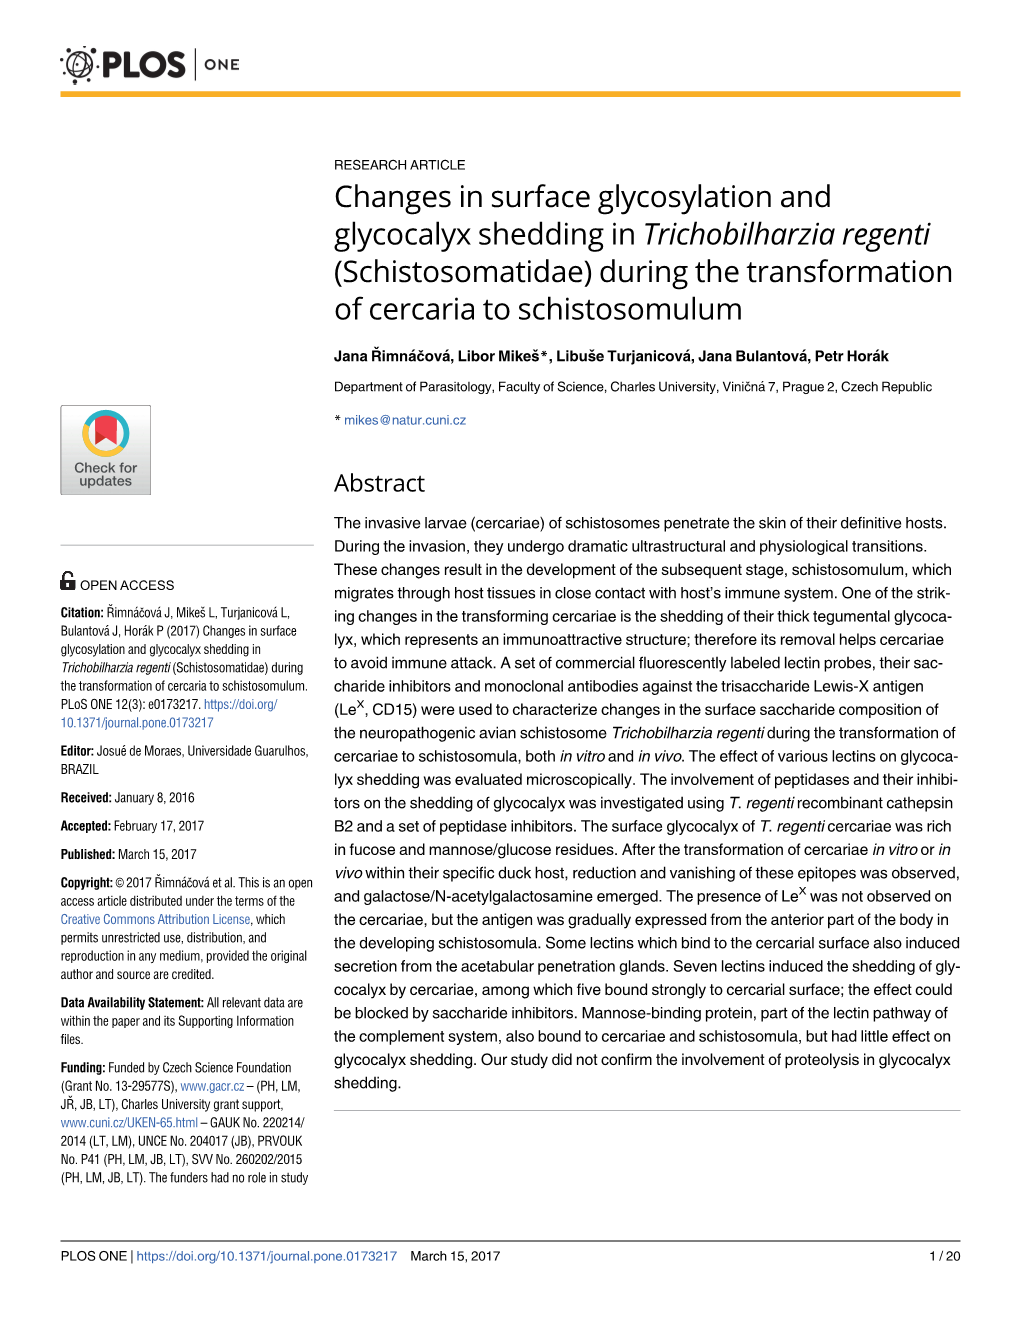 Changes in Surface Glycosylation and Glycocalyx Shedding in Trichobilharzia Regenti (Schistosomatidae) During the Transformation of Cercaria to Schistosomulum